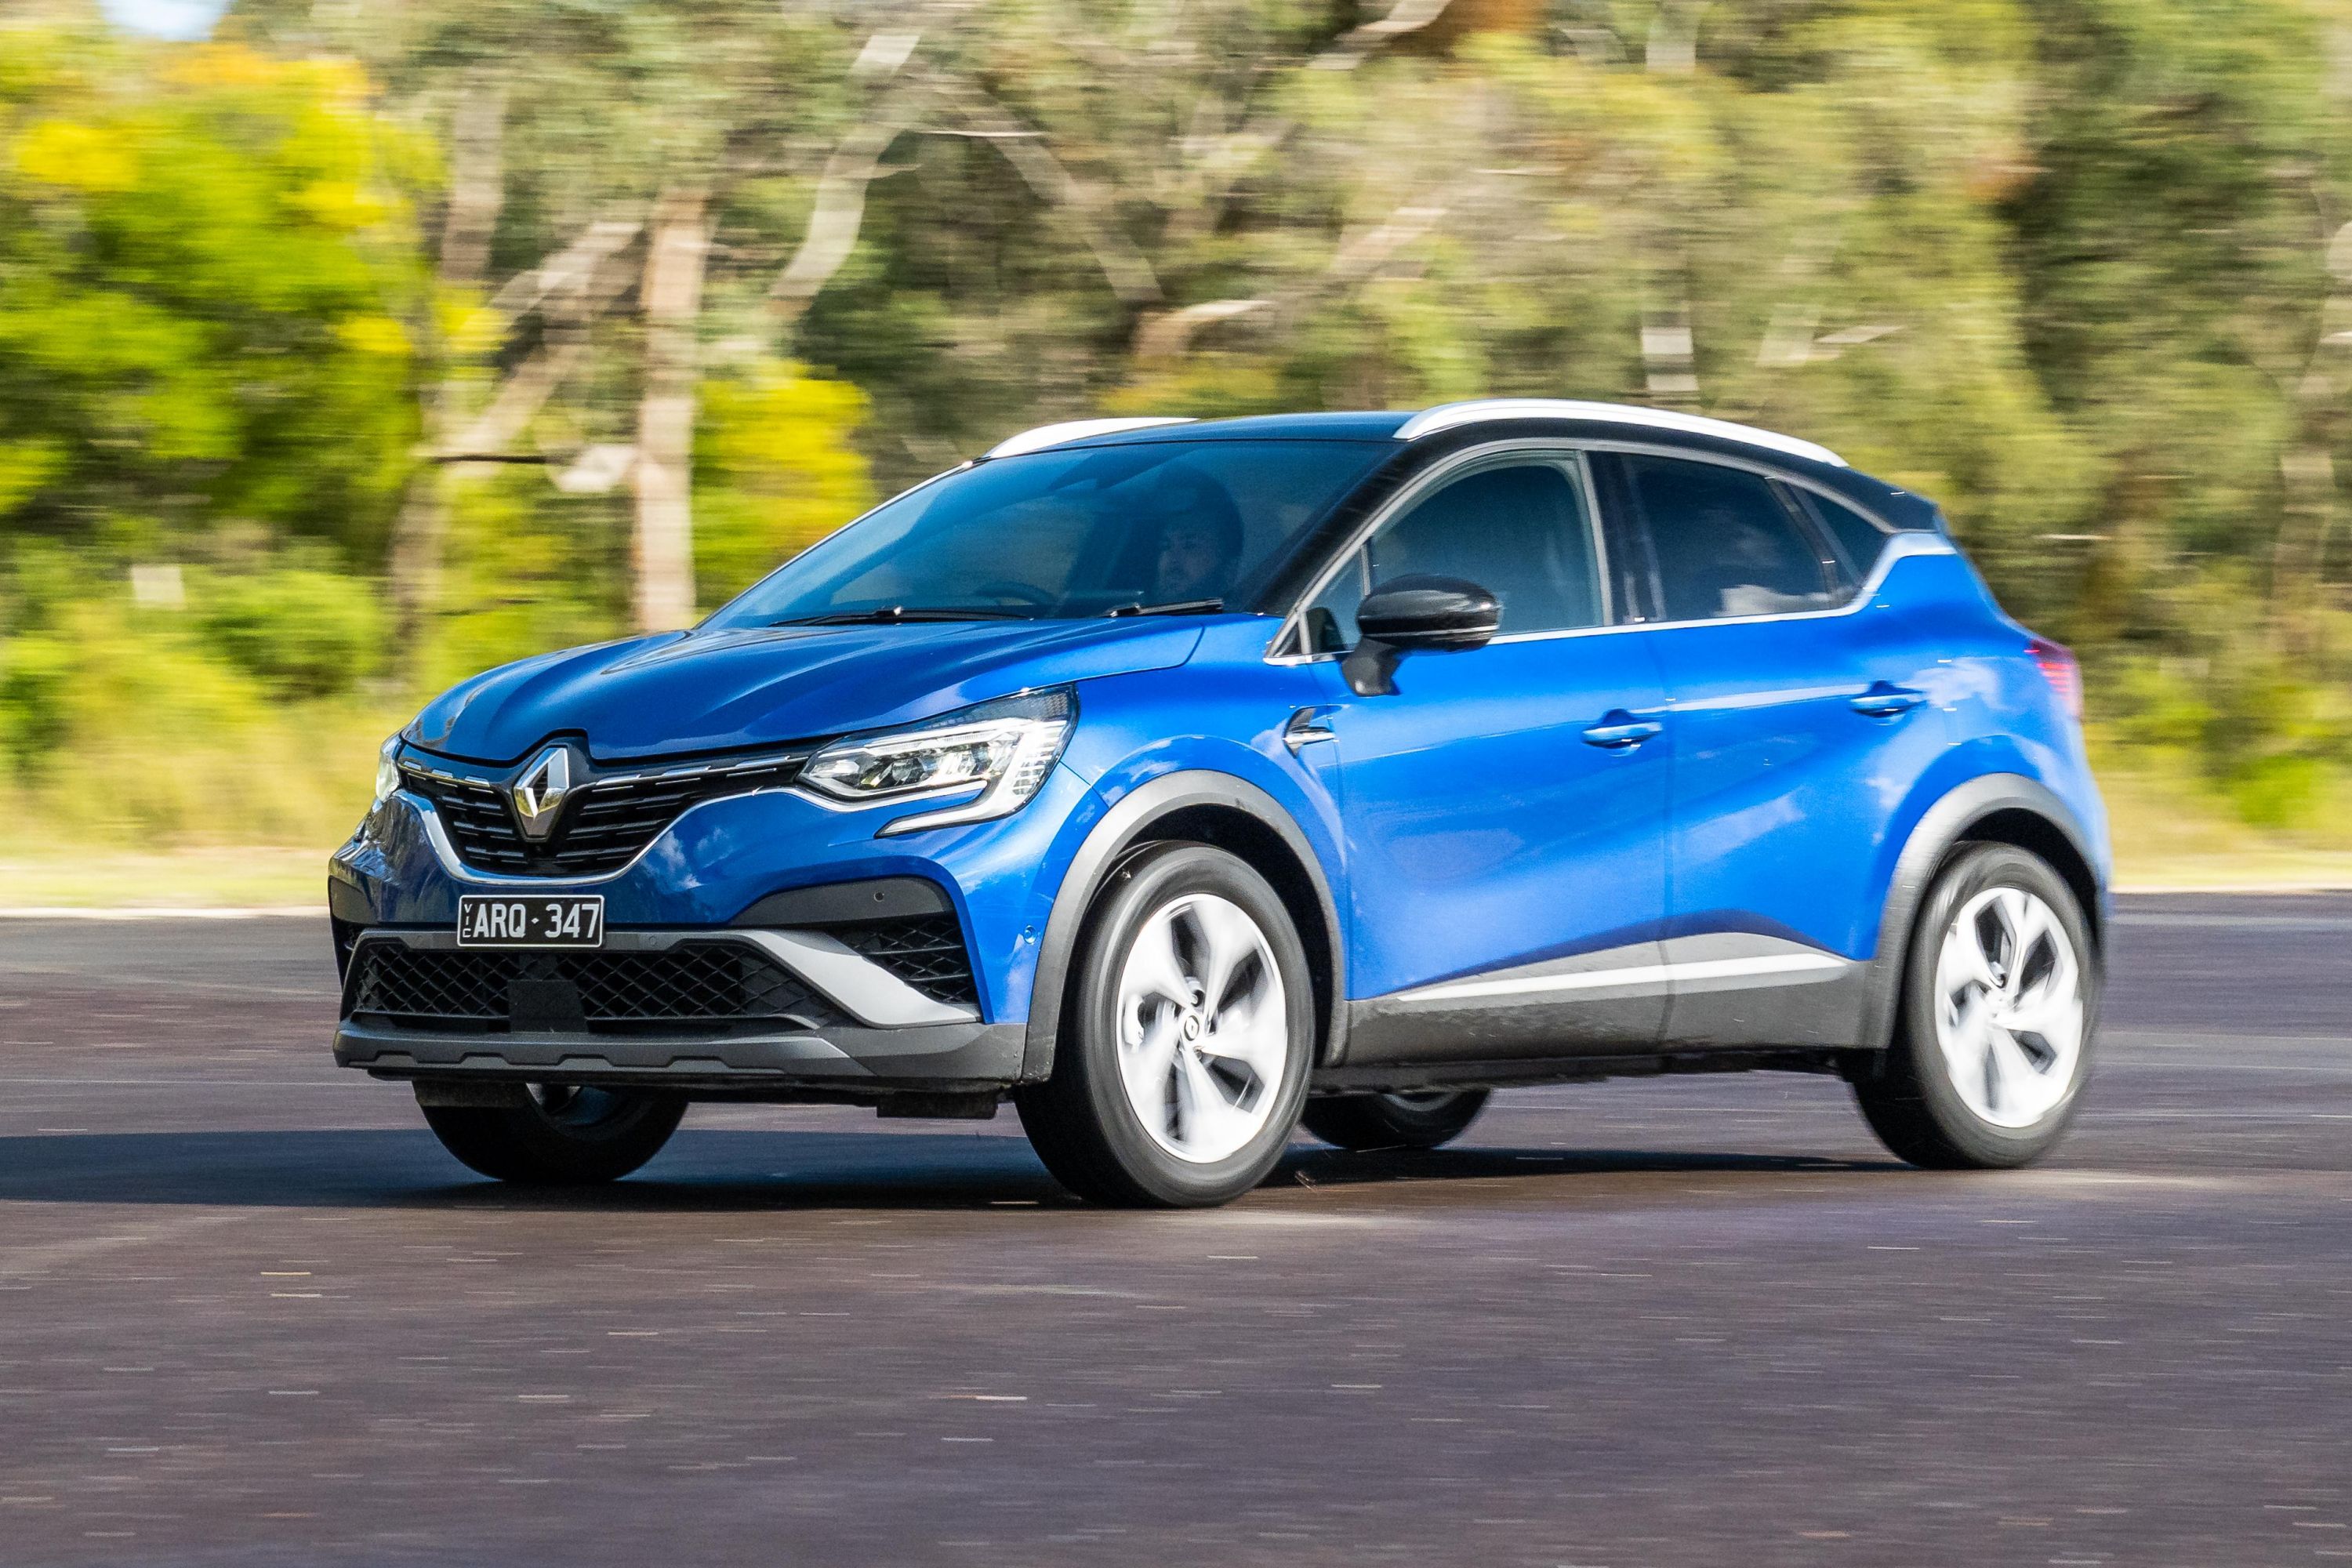 The All-new Renault Captur gets top marks Euro NCAP safety rantings with 5  stars. - Renault Group